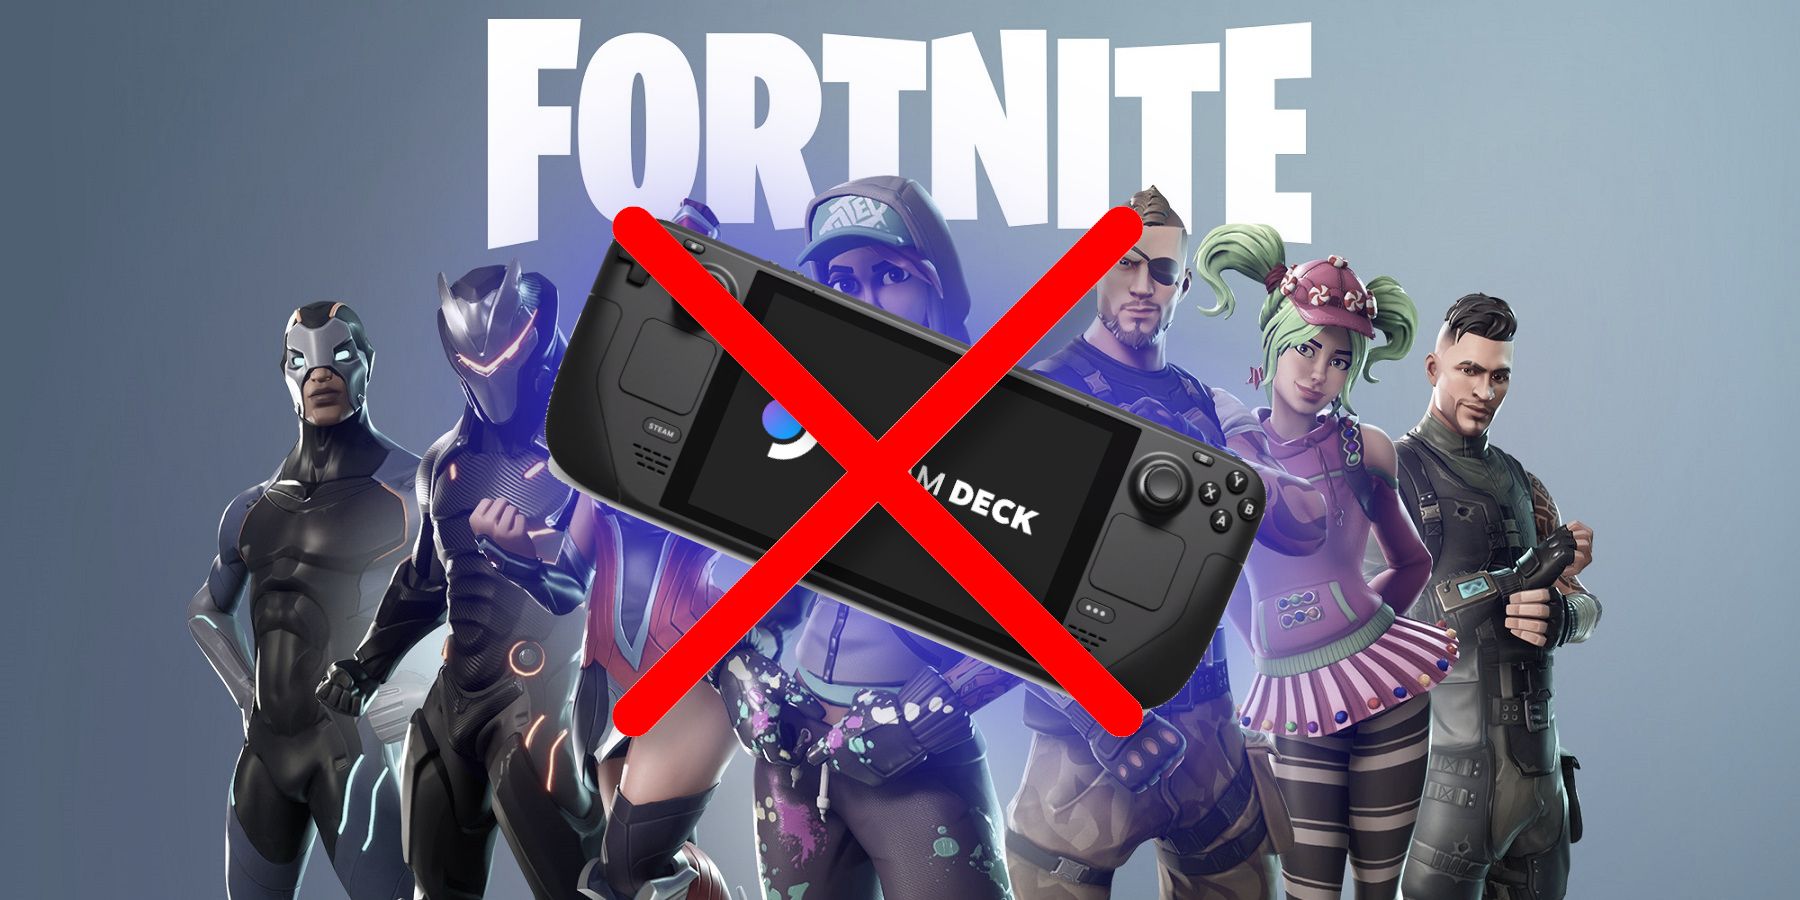 Fortnite' will not be supported on the Steam Deck